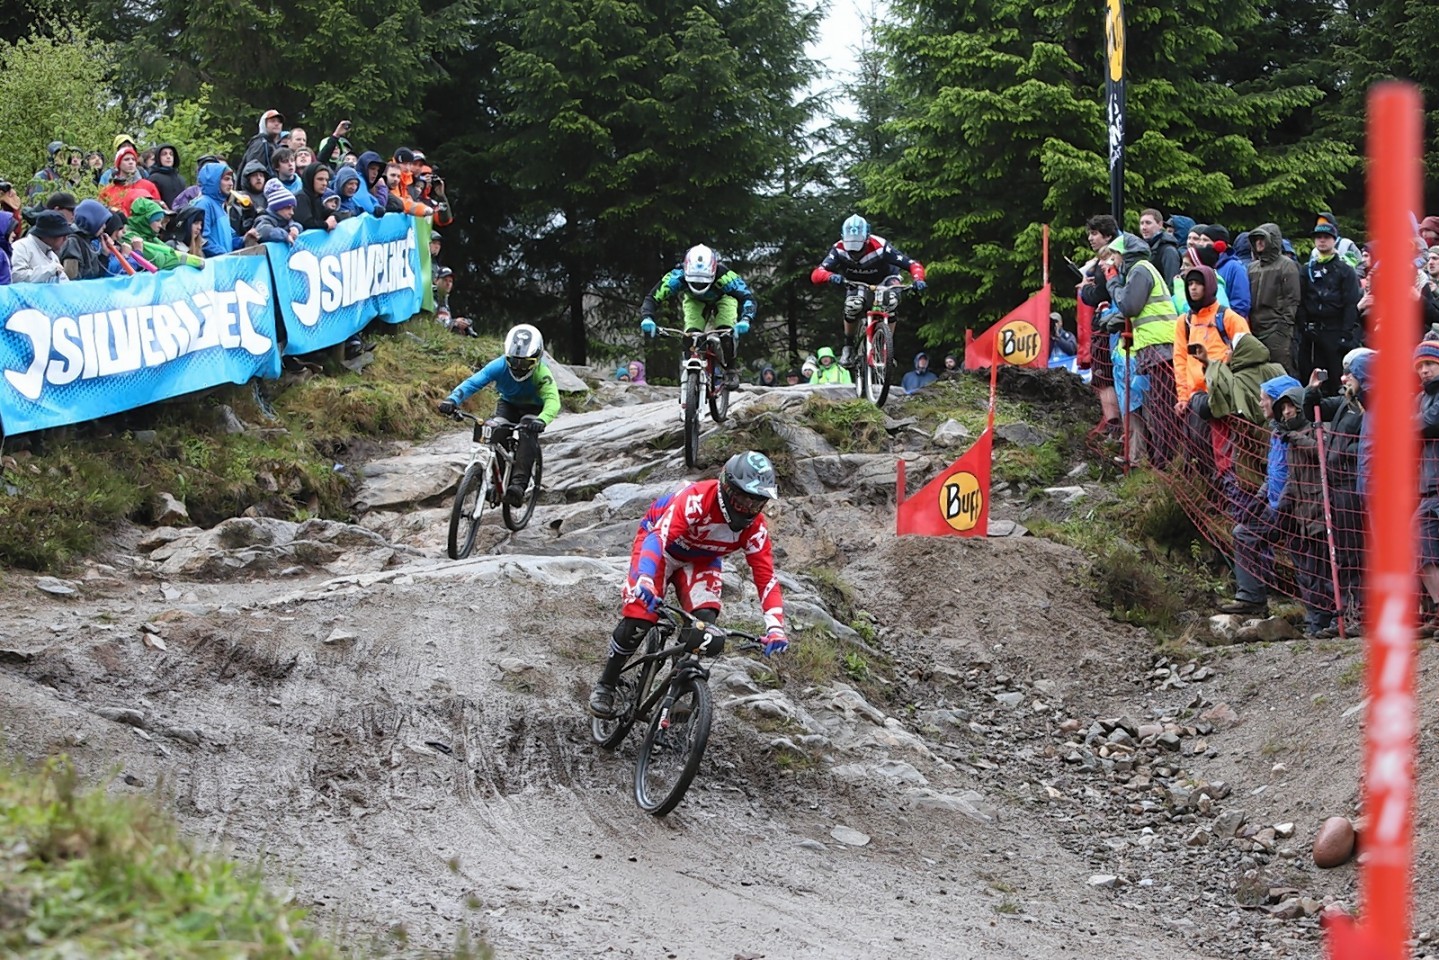 Riders compete on the 4X Pro Tour event at Fort William.